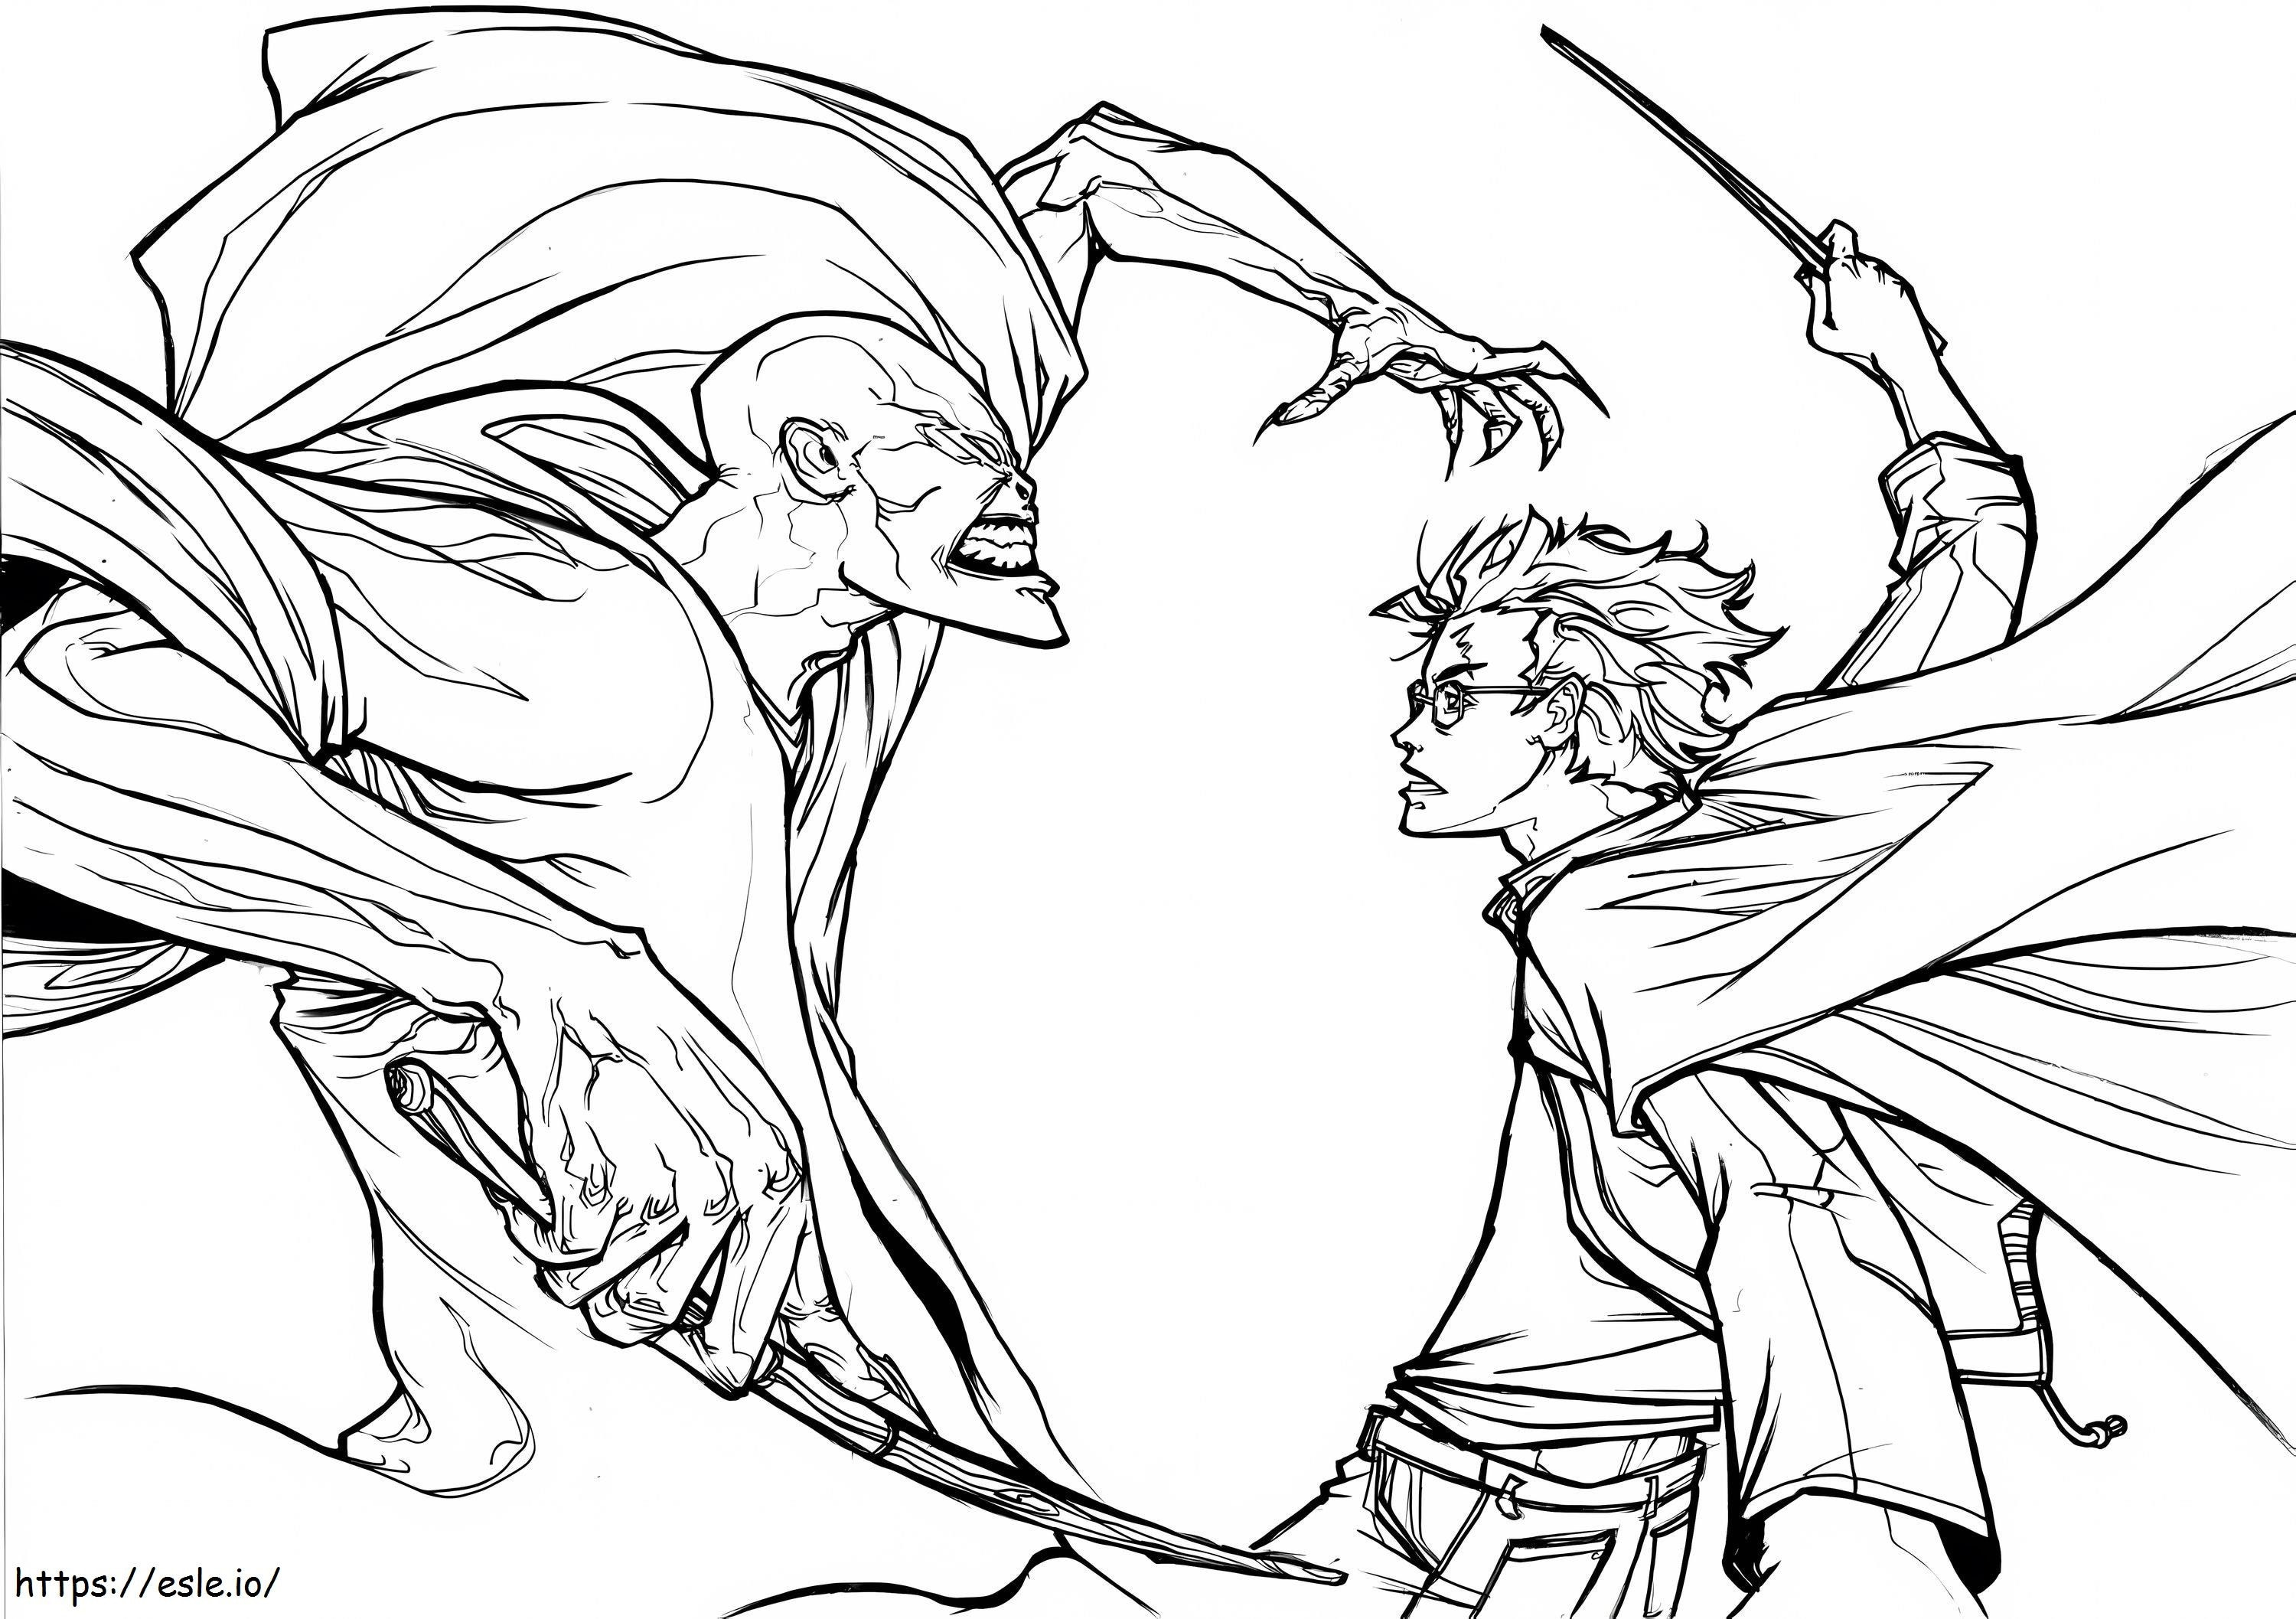 Harry Potter Vs Lord Voldemort coloring page